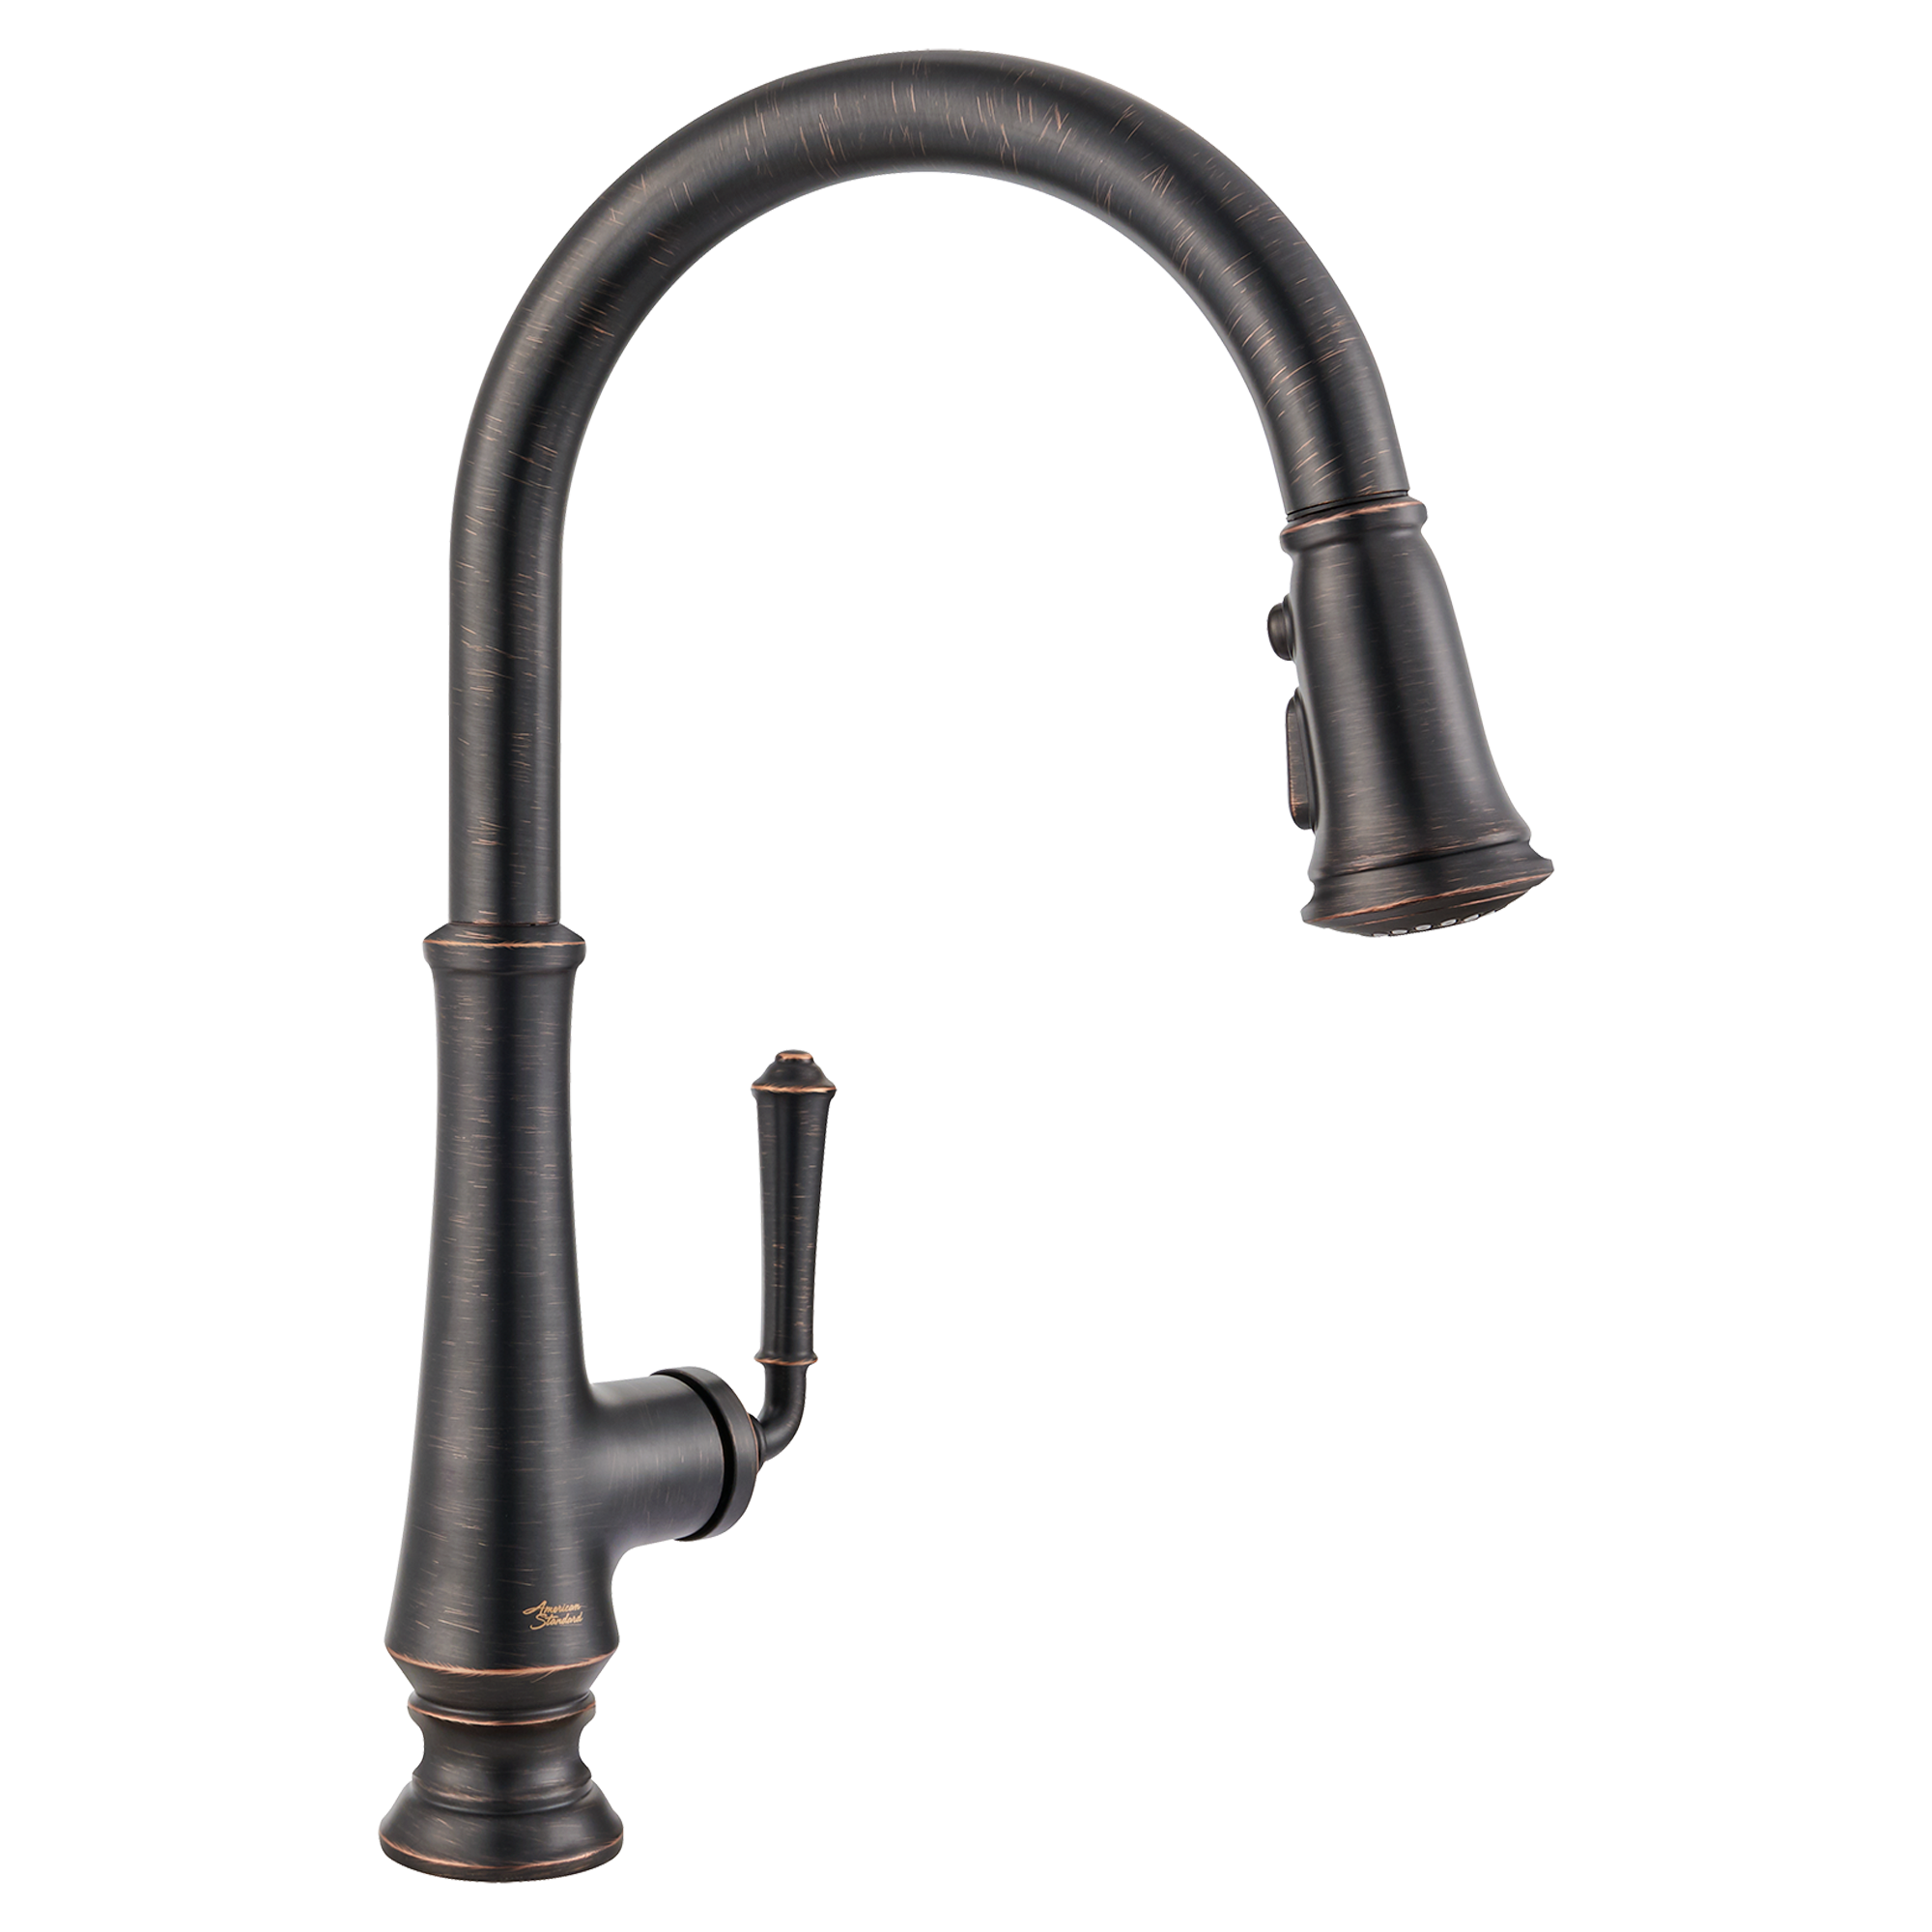 4279.300.278 DELANCEY PULL
DOWN KITCHEN FAUCET LEGACY
BRONZE A/S